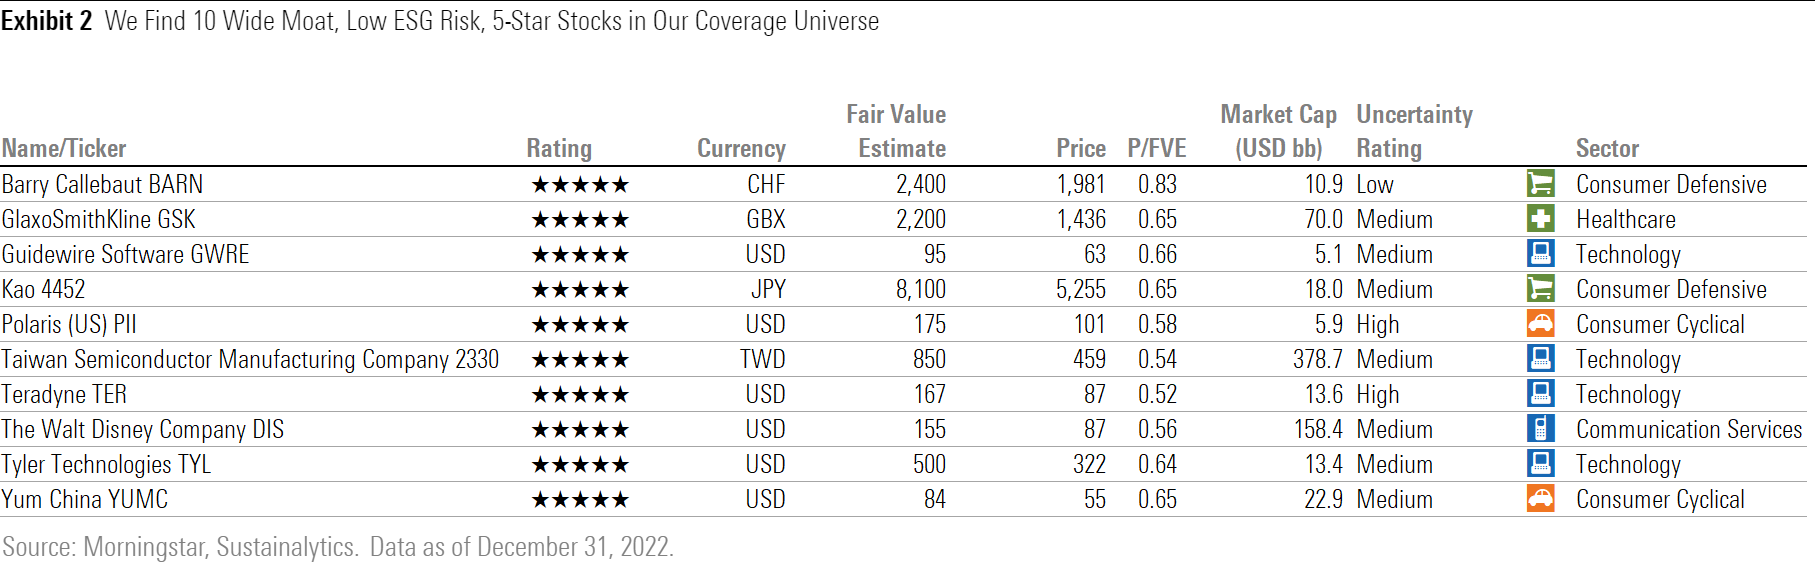 Table shows details for 10 stocks which have wide economic moats, low ESG Risk Ratings, and 5-star ratings.